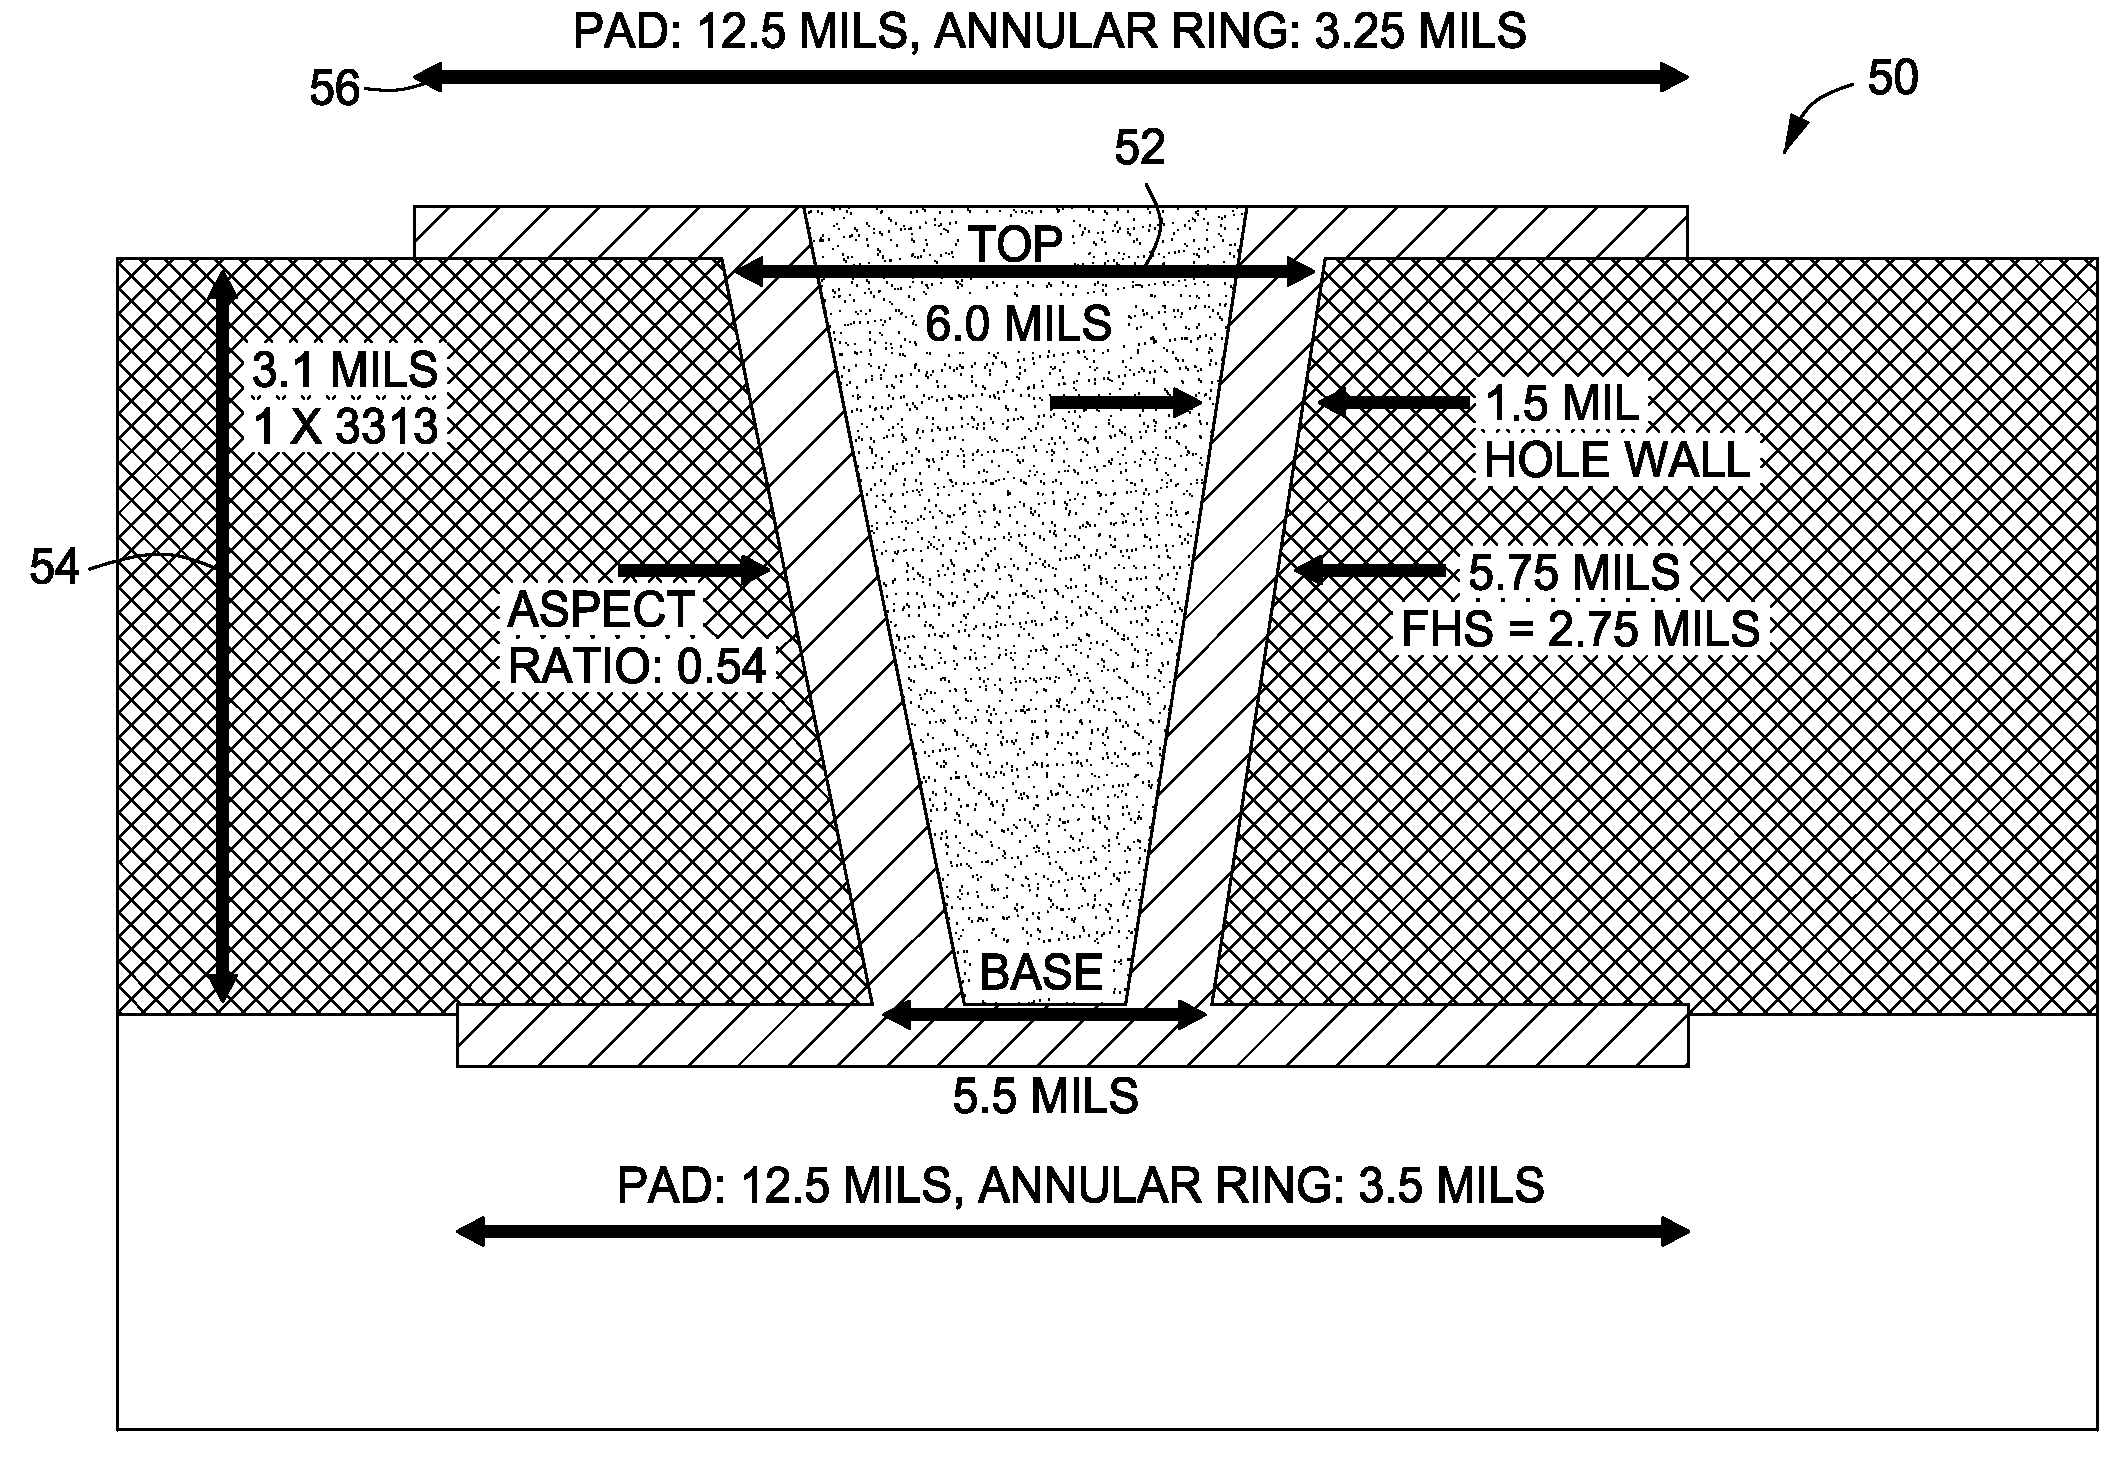 Connecting an integrated circuit on a surface layer of a printed circuit board